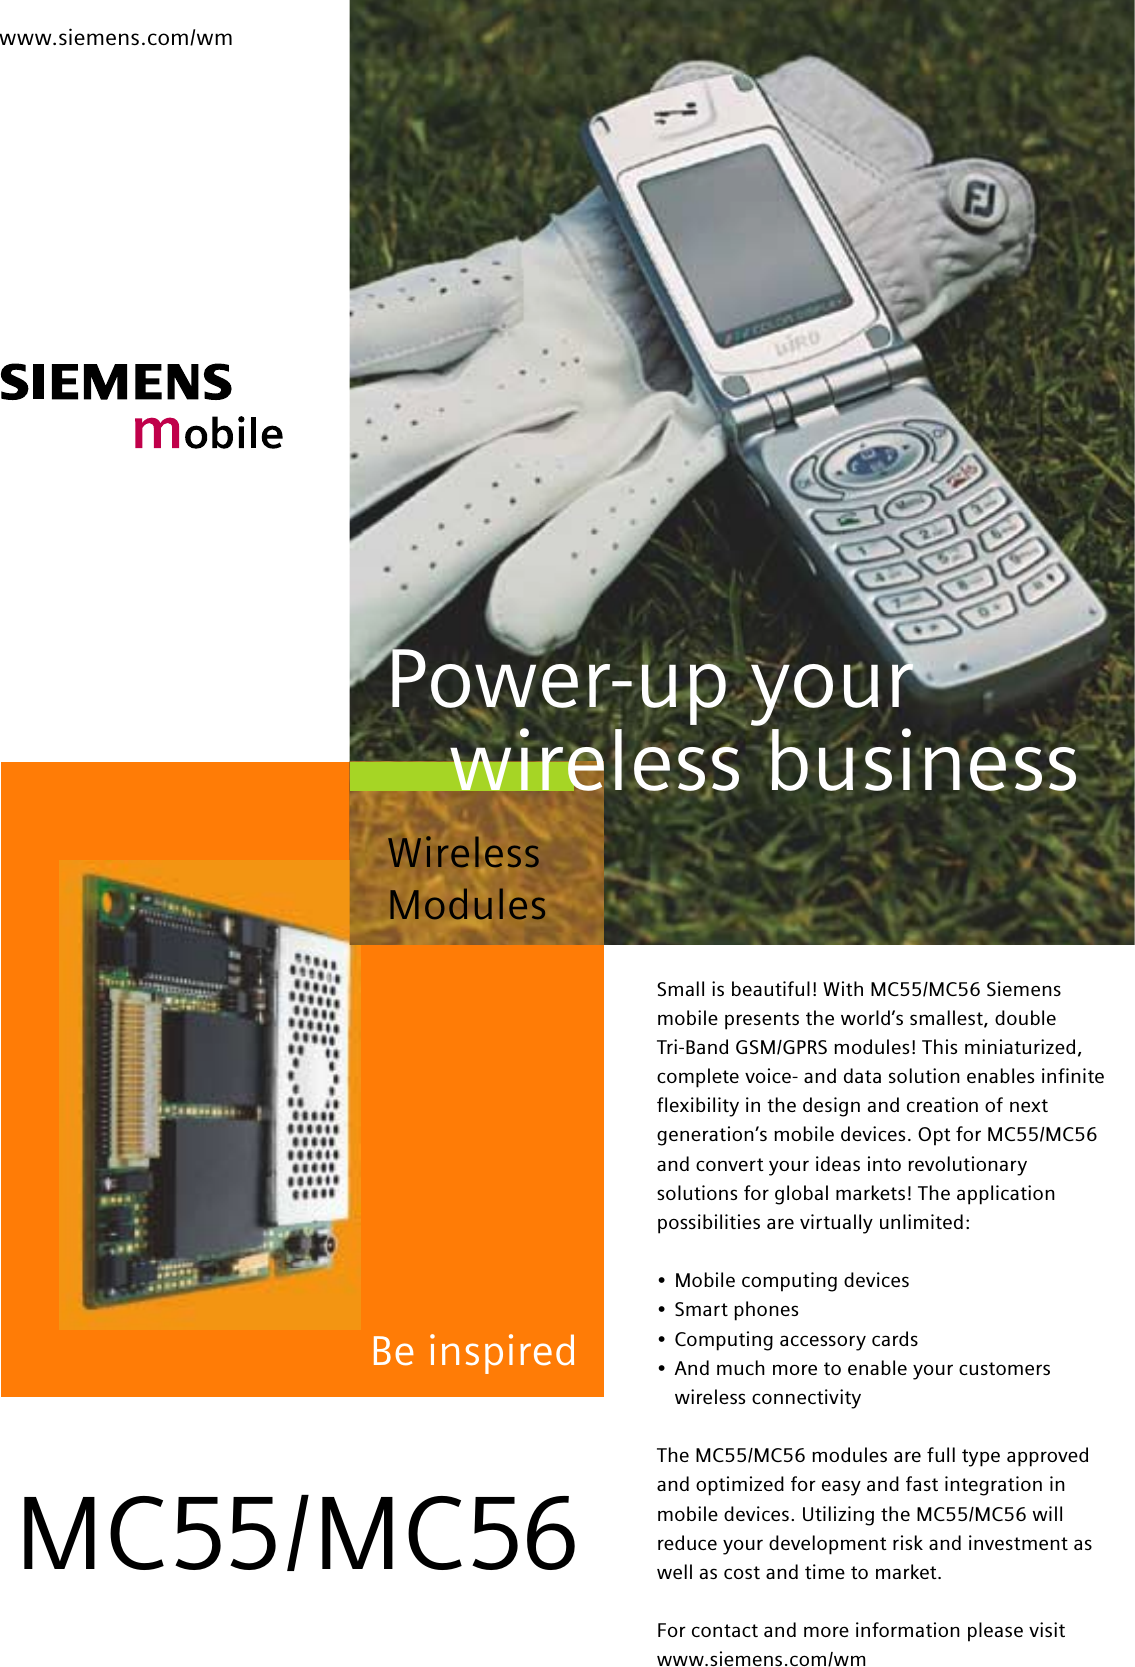 www.siemens.com/wmBe inspiredSmall is beautiful! With MC55/MC56 Siemensmobile presents the world’s smallest, double Tri-Band GSM/GPRS modules! This miniaturized,complete voice- and data solution enables infiniteflexibility in the design and creation of nextgeneration’s mobile devices. Opt for MC55/MC56and convert your ideas into revolutionarysolutions for global markets! The applicationpossibilities are virtually unlimited:•Mobile computing devices•Smart phones•Computing accessory cards•And much more to enable your customerswireless connectivityThe MC55/MC56 modules are full type approvedand optimized for easy and fast integration inmobile devices. Utilizing the MC55/MC56 willreduce your development risk and investment aswell as cost and time to market.For contact and more information please visitwww.siemens.com/wmMC55/MC56Wireless ModulesPower-up yourwireless business